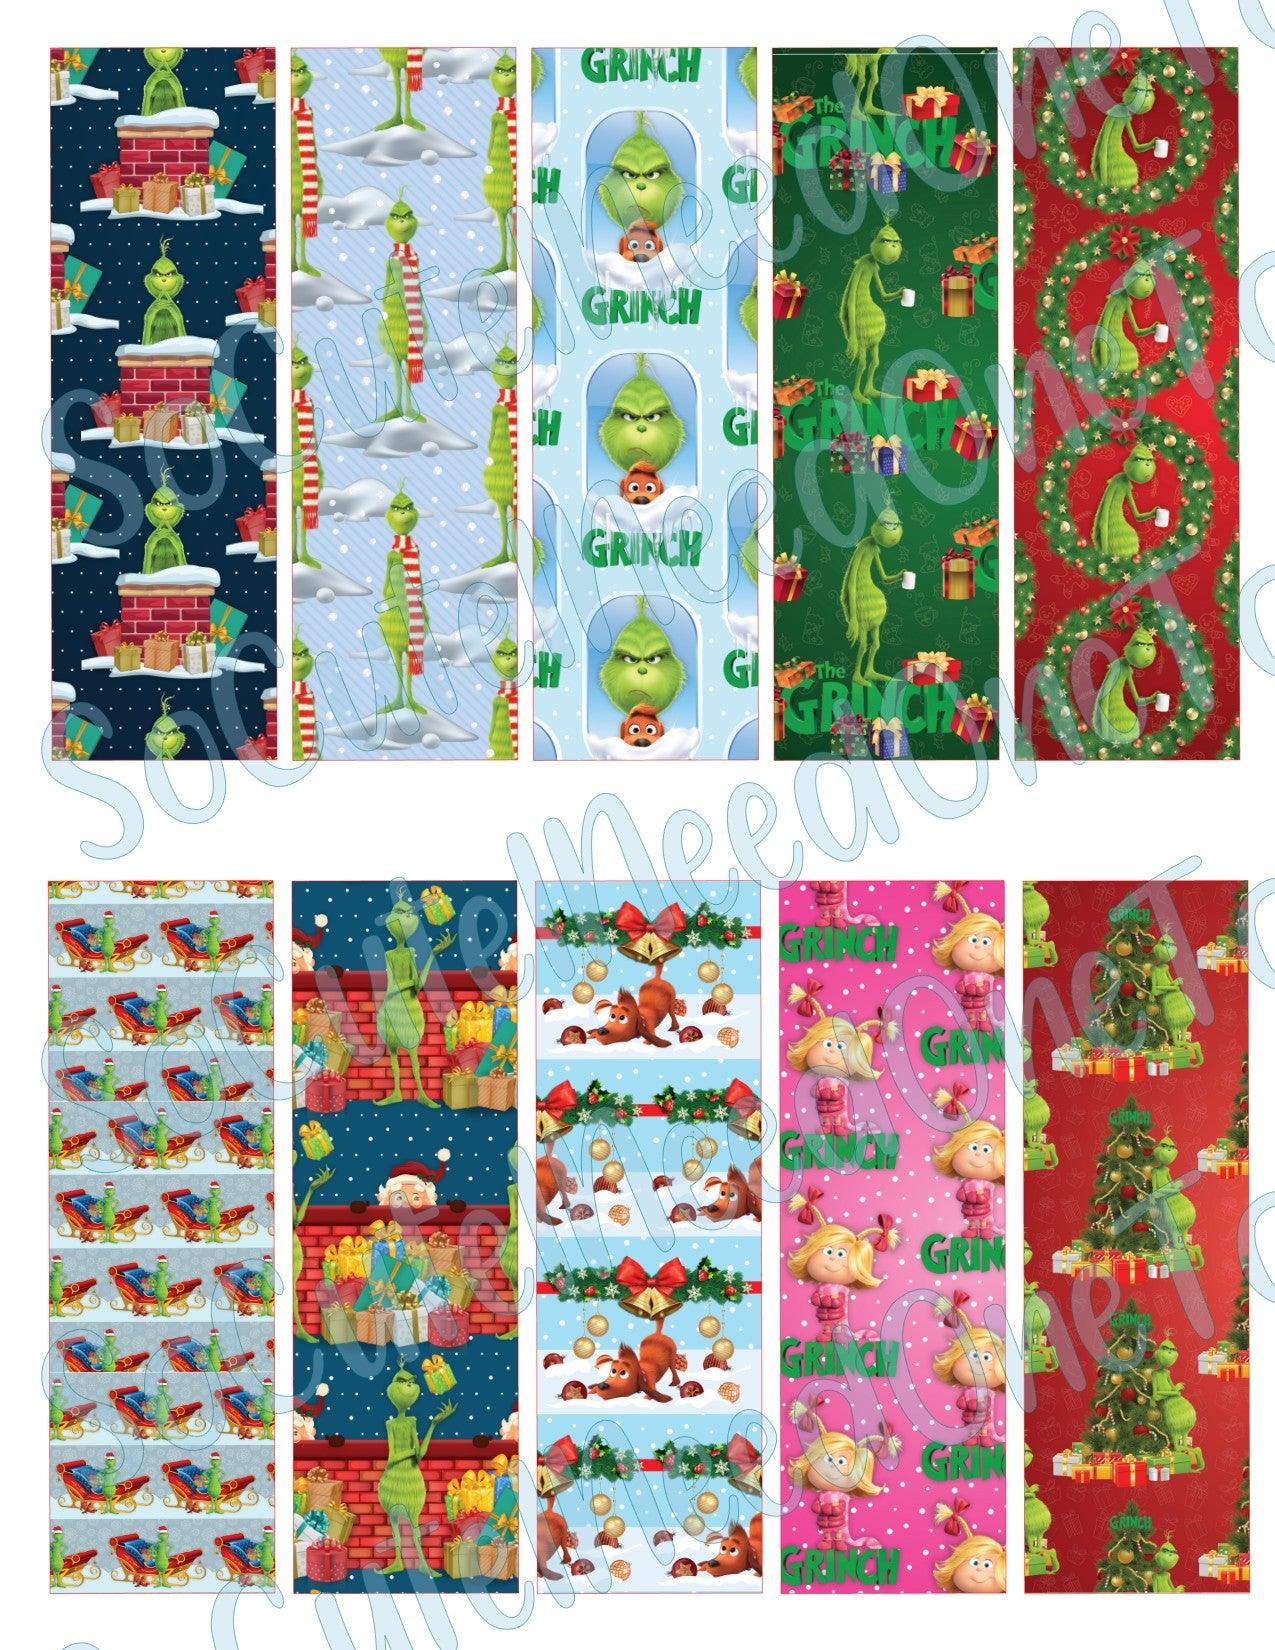 Grinch PEN Wraps - Clear/White Waterslide Paper Ready To Use - SoCuteINeedOneToo